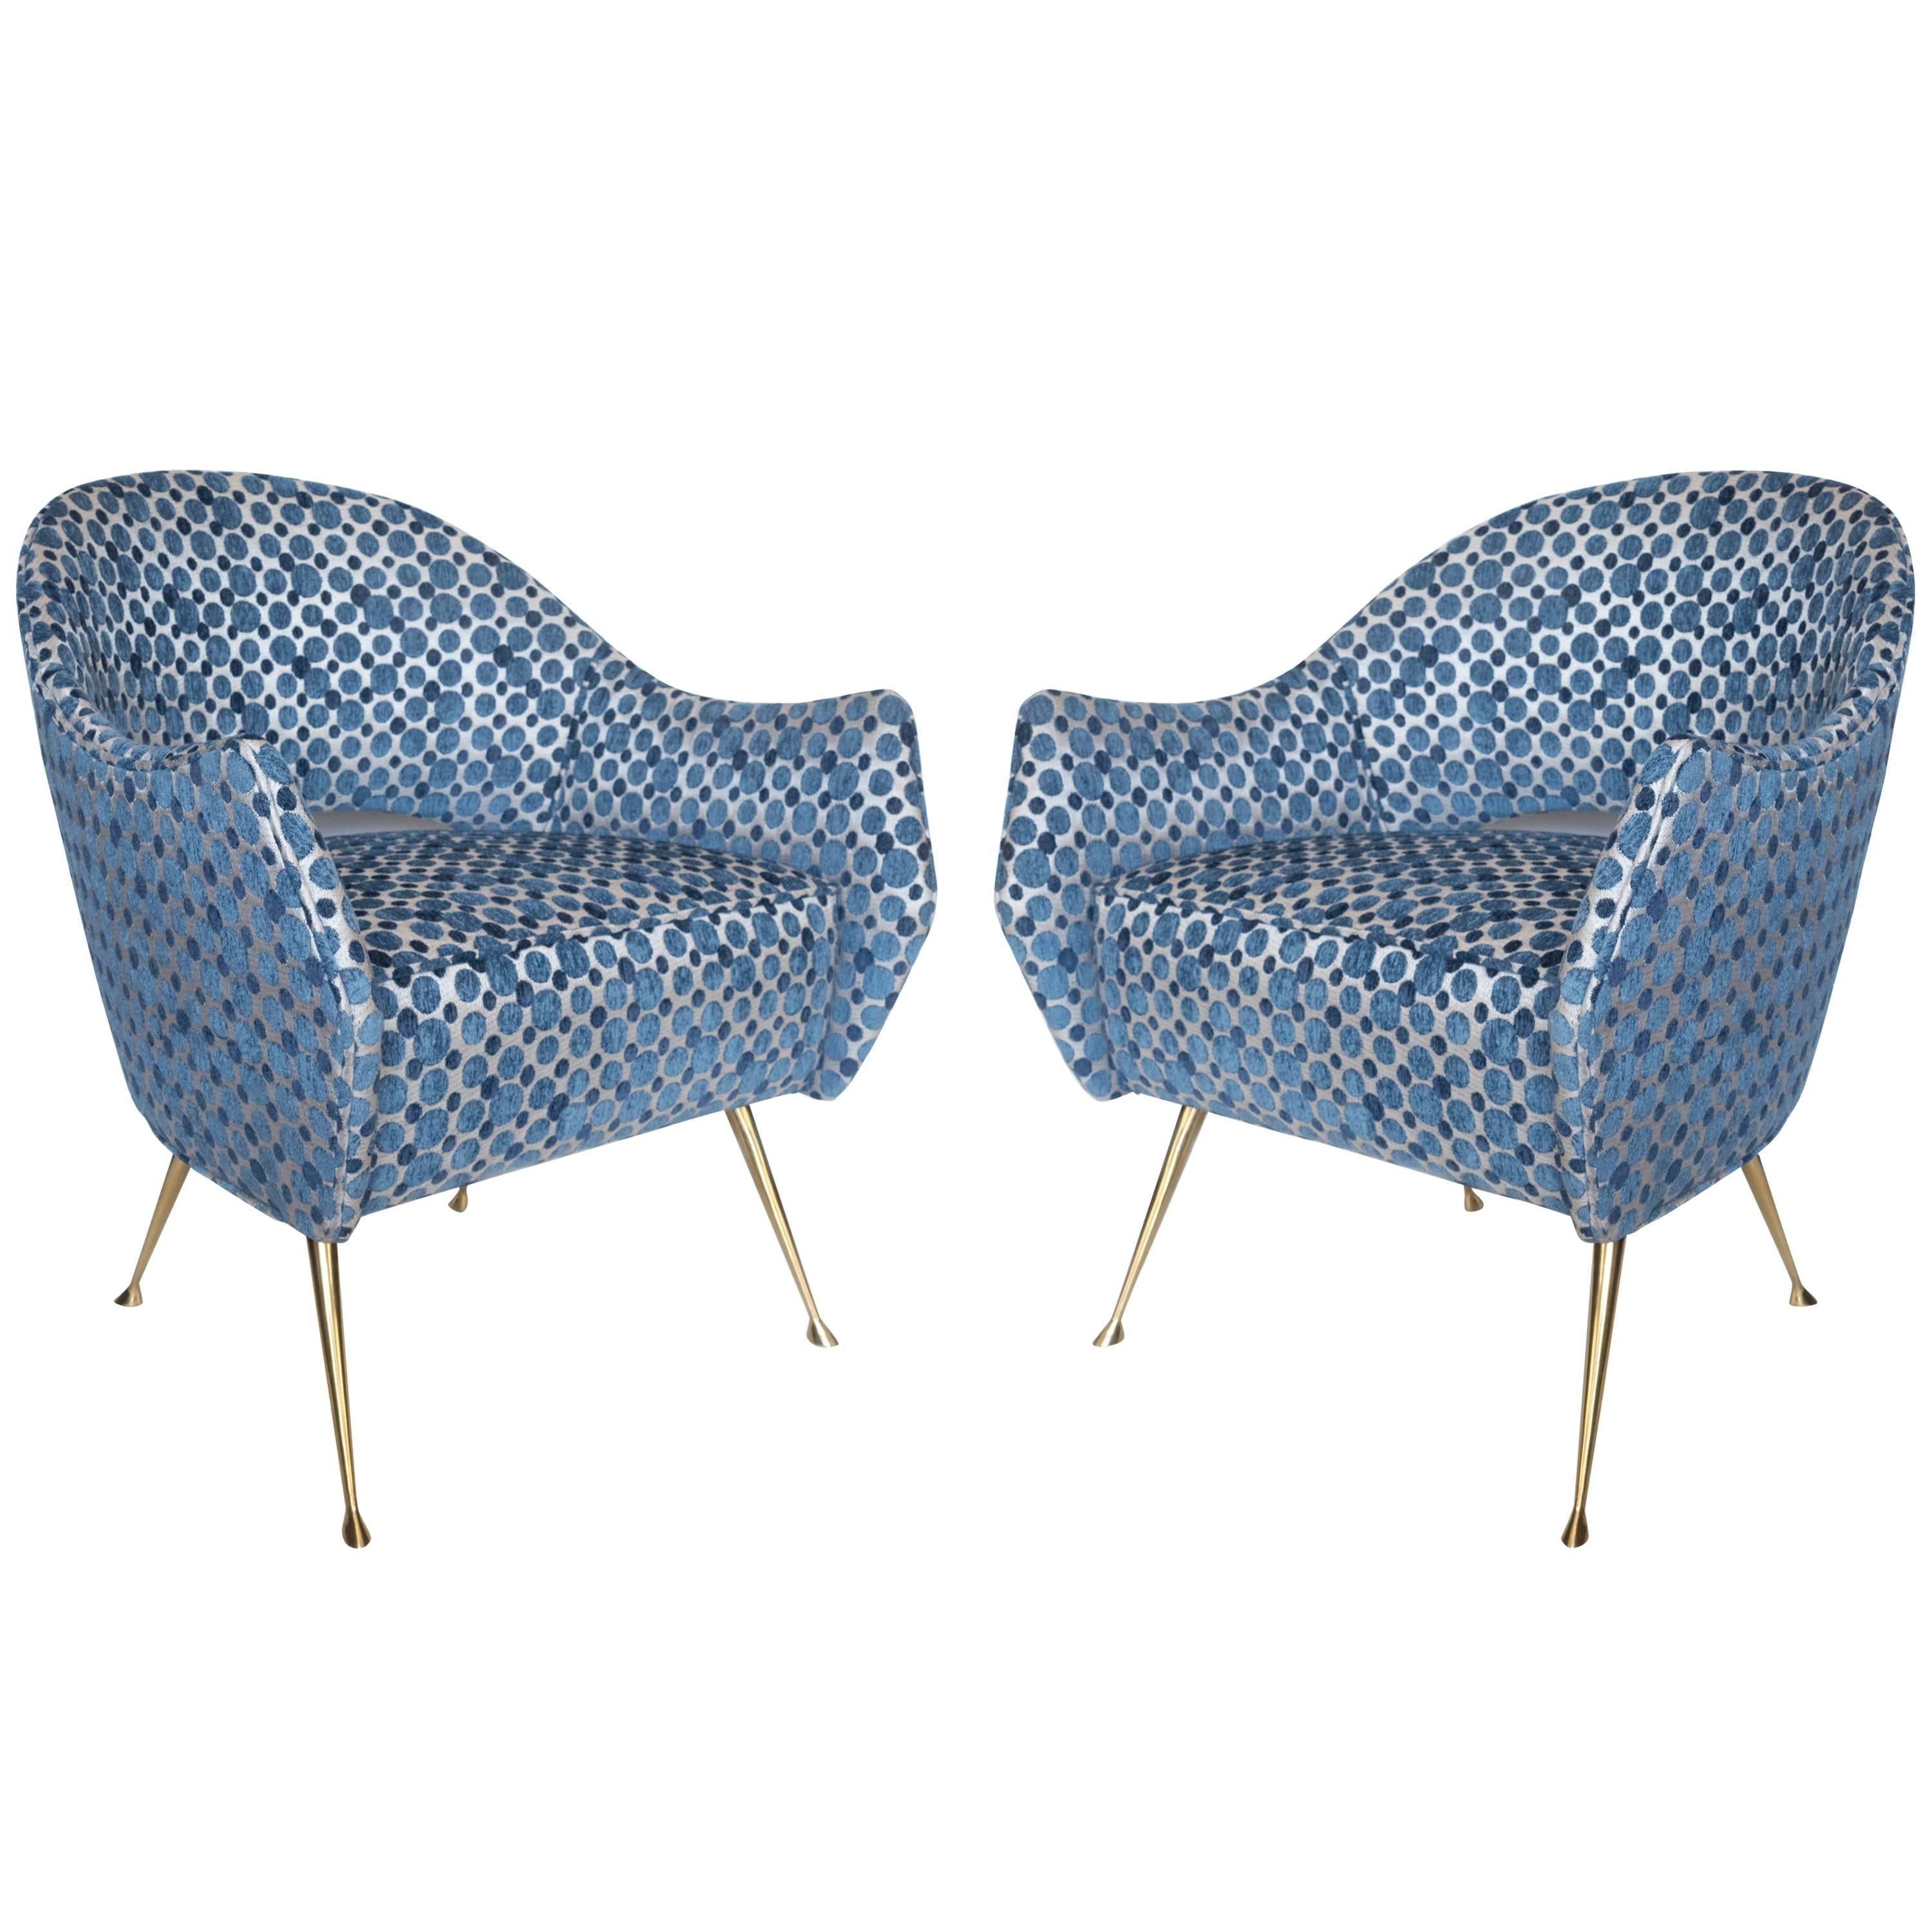 Pair of Briance Armchairs